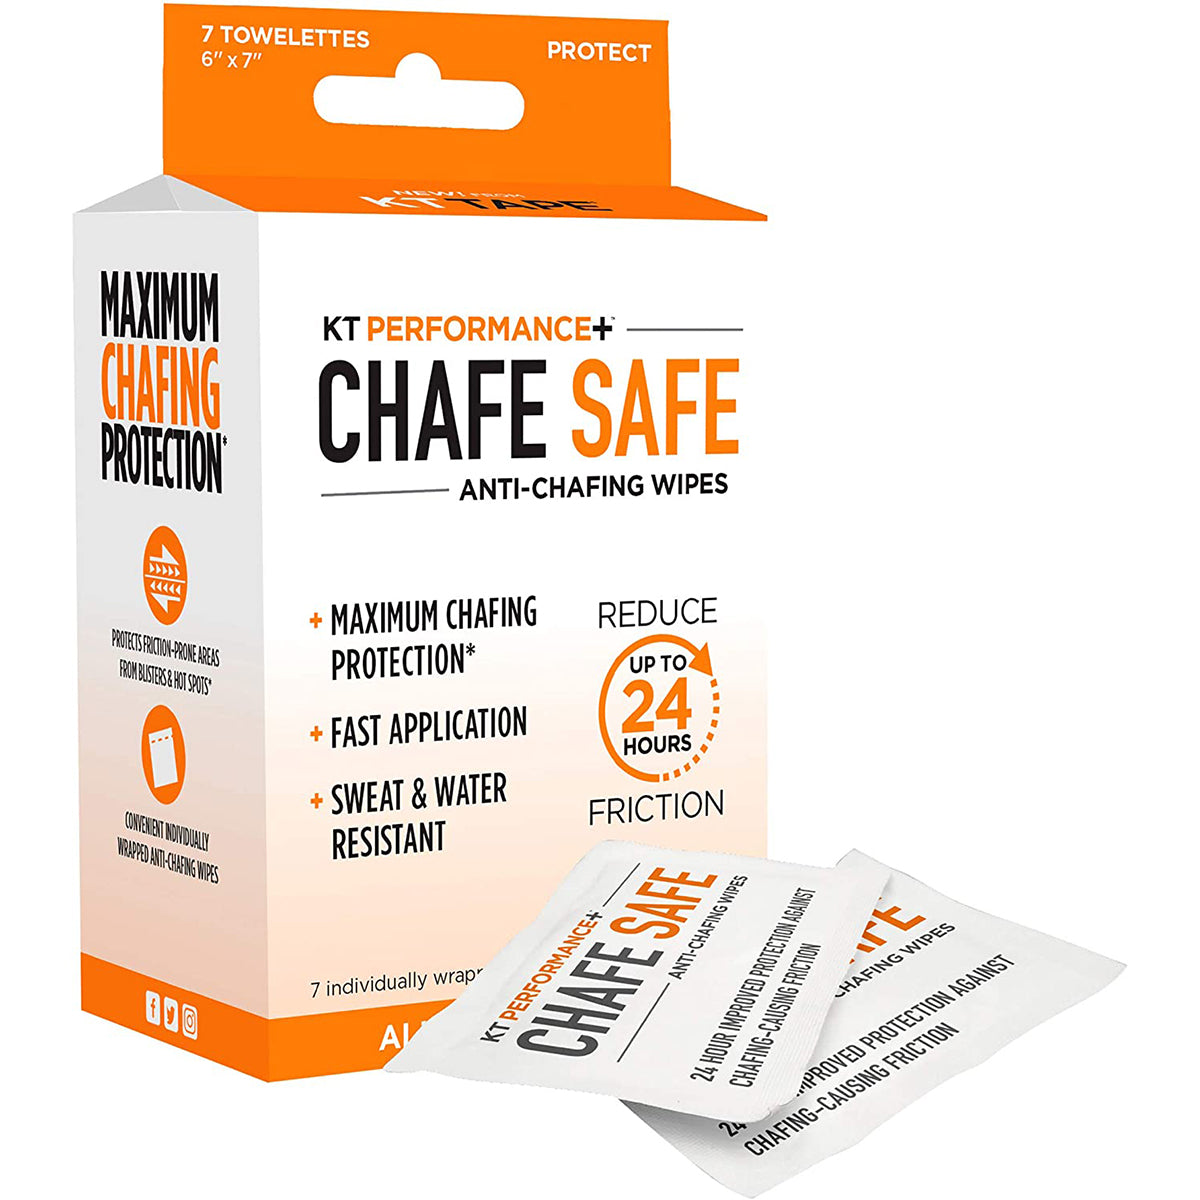 KT Tape Performance+ Chafe Safe Anti-Chafing Wipes KT Tape